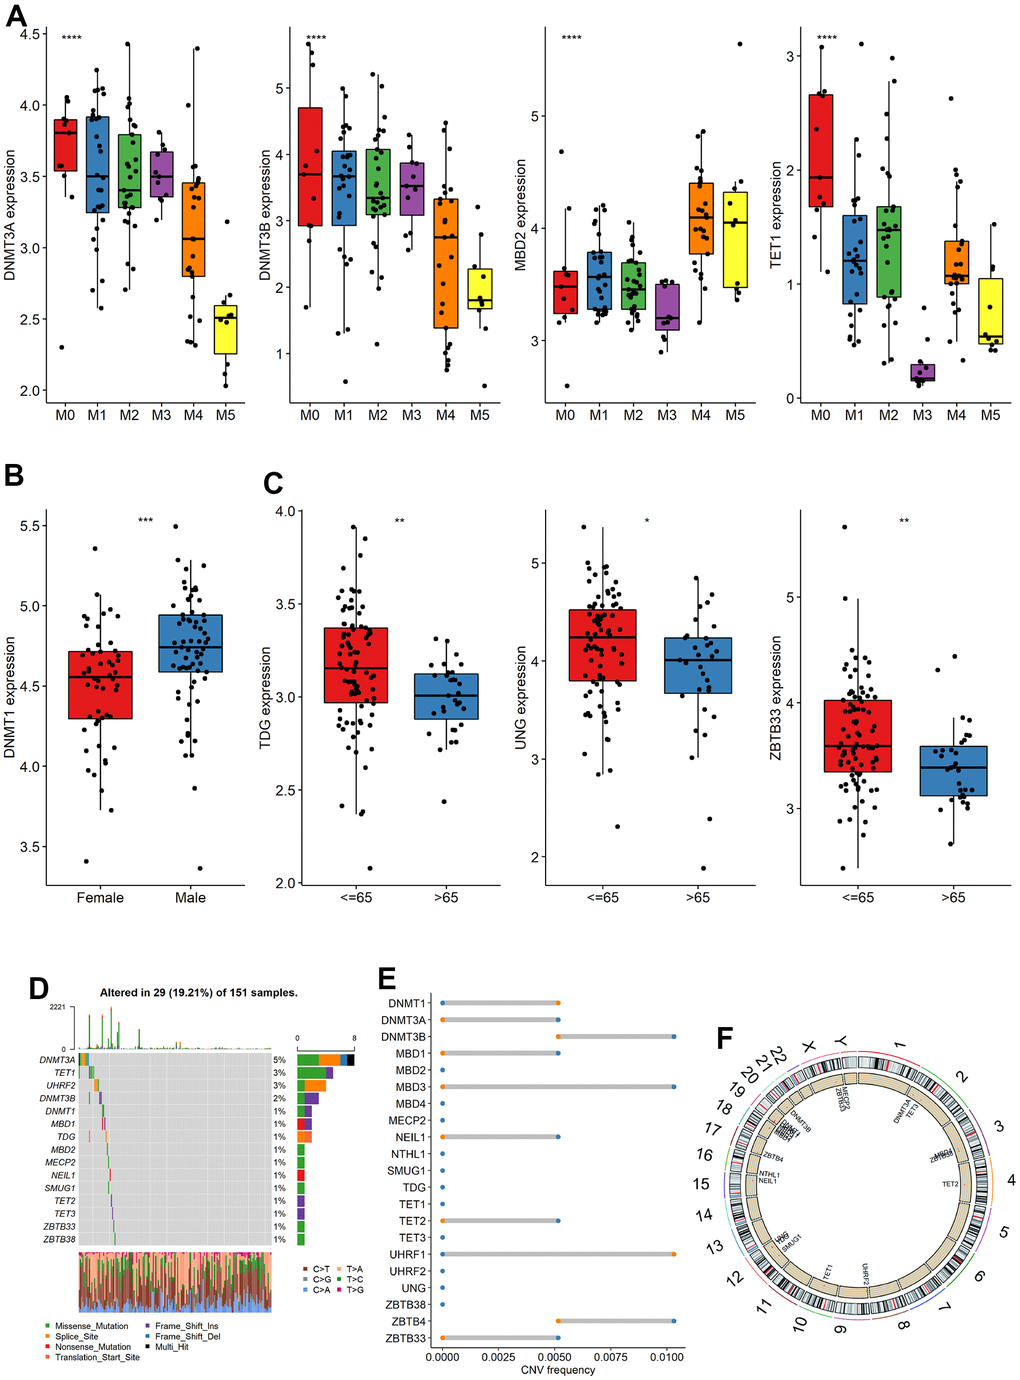 Expression, mutation and copy number variation of m5C gene. (A–C) The expression differences of m5C gene among different groups (FAB, Sex, Age), (D) mutation, (E) copy number variation and (F) localization of m5C gene on chromosome.